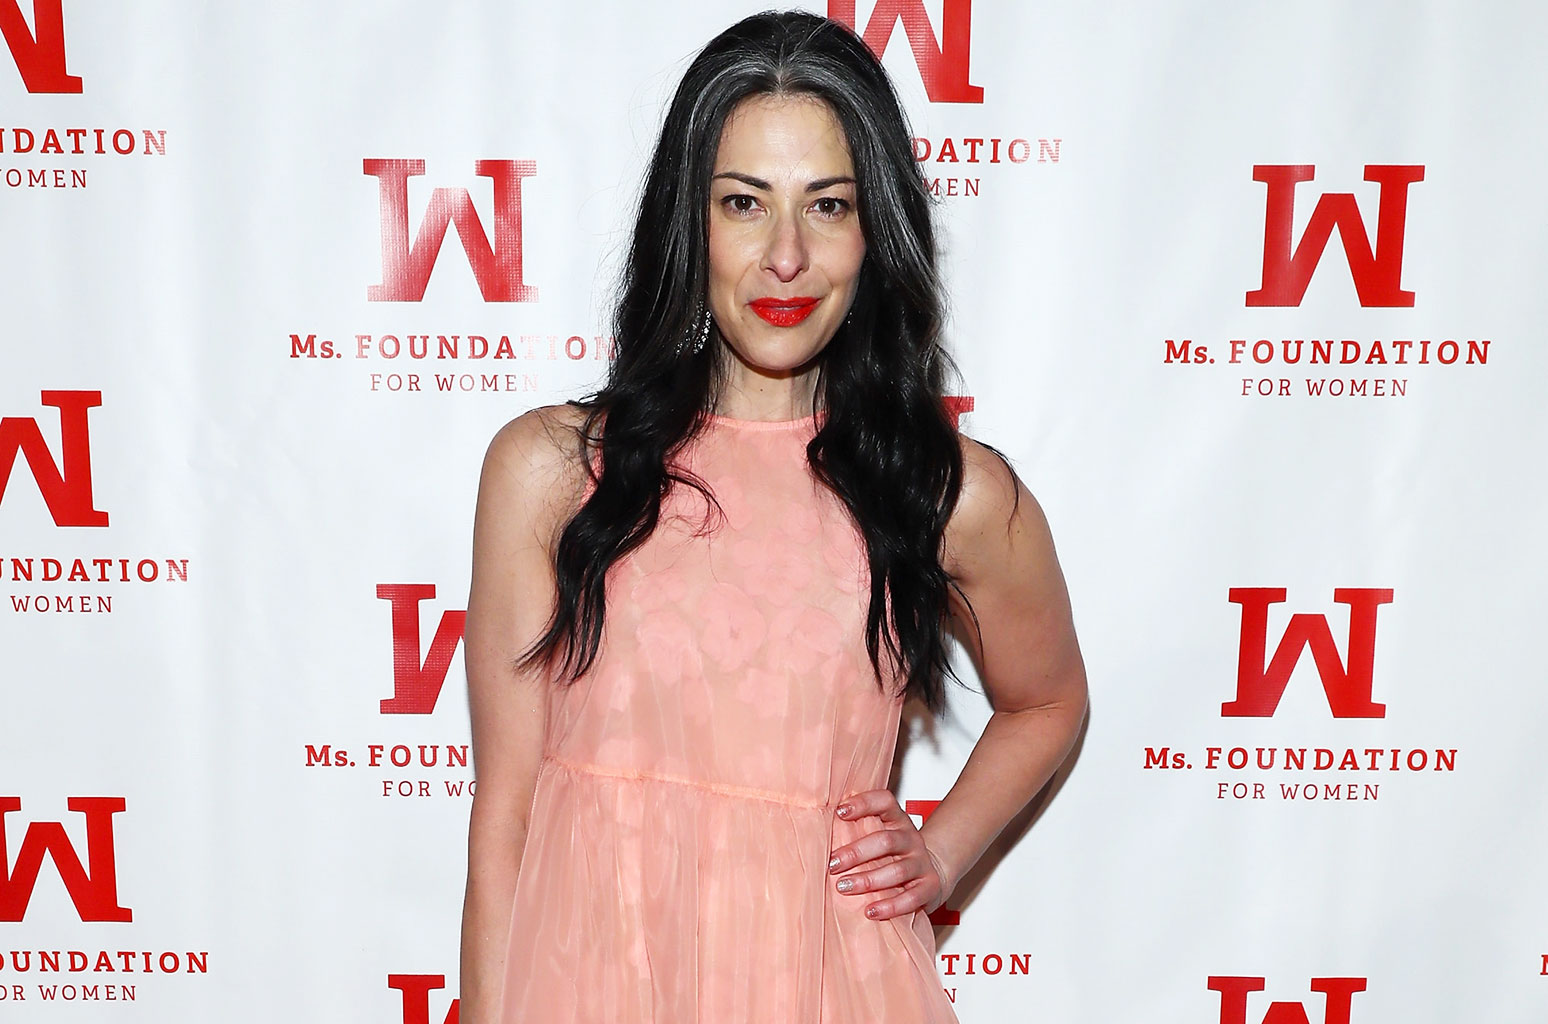 'What Not to Wear' Star Stacy London Opens Up About Her Relationship With Musician Cat Yezbak - www.billboard.com